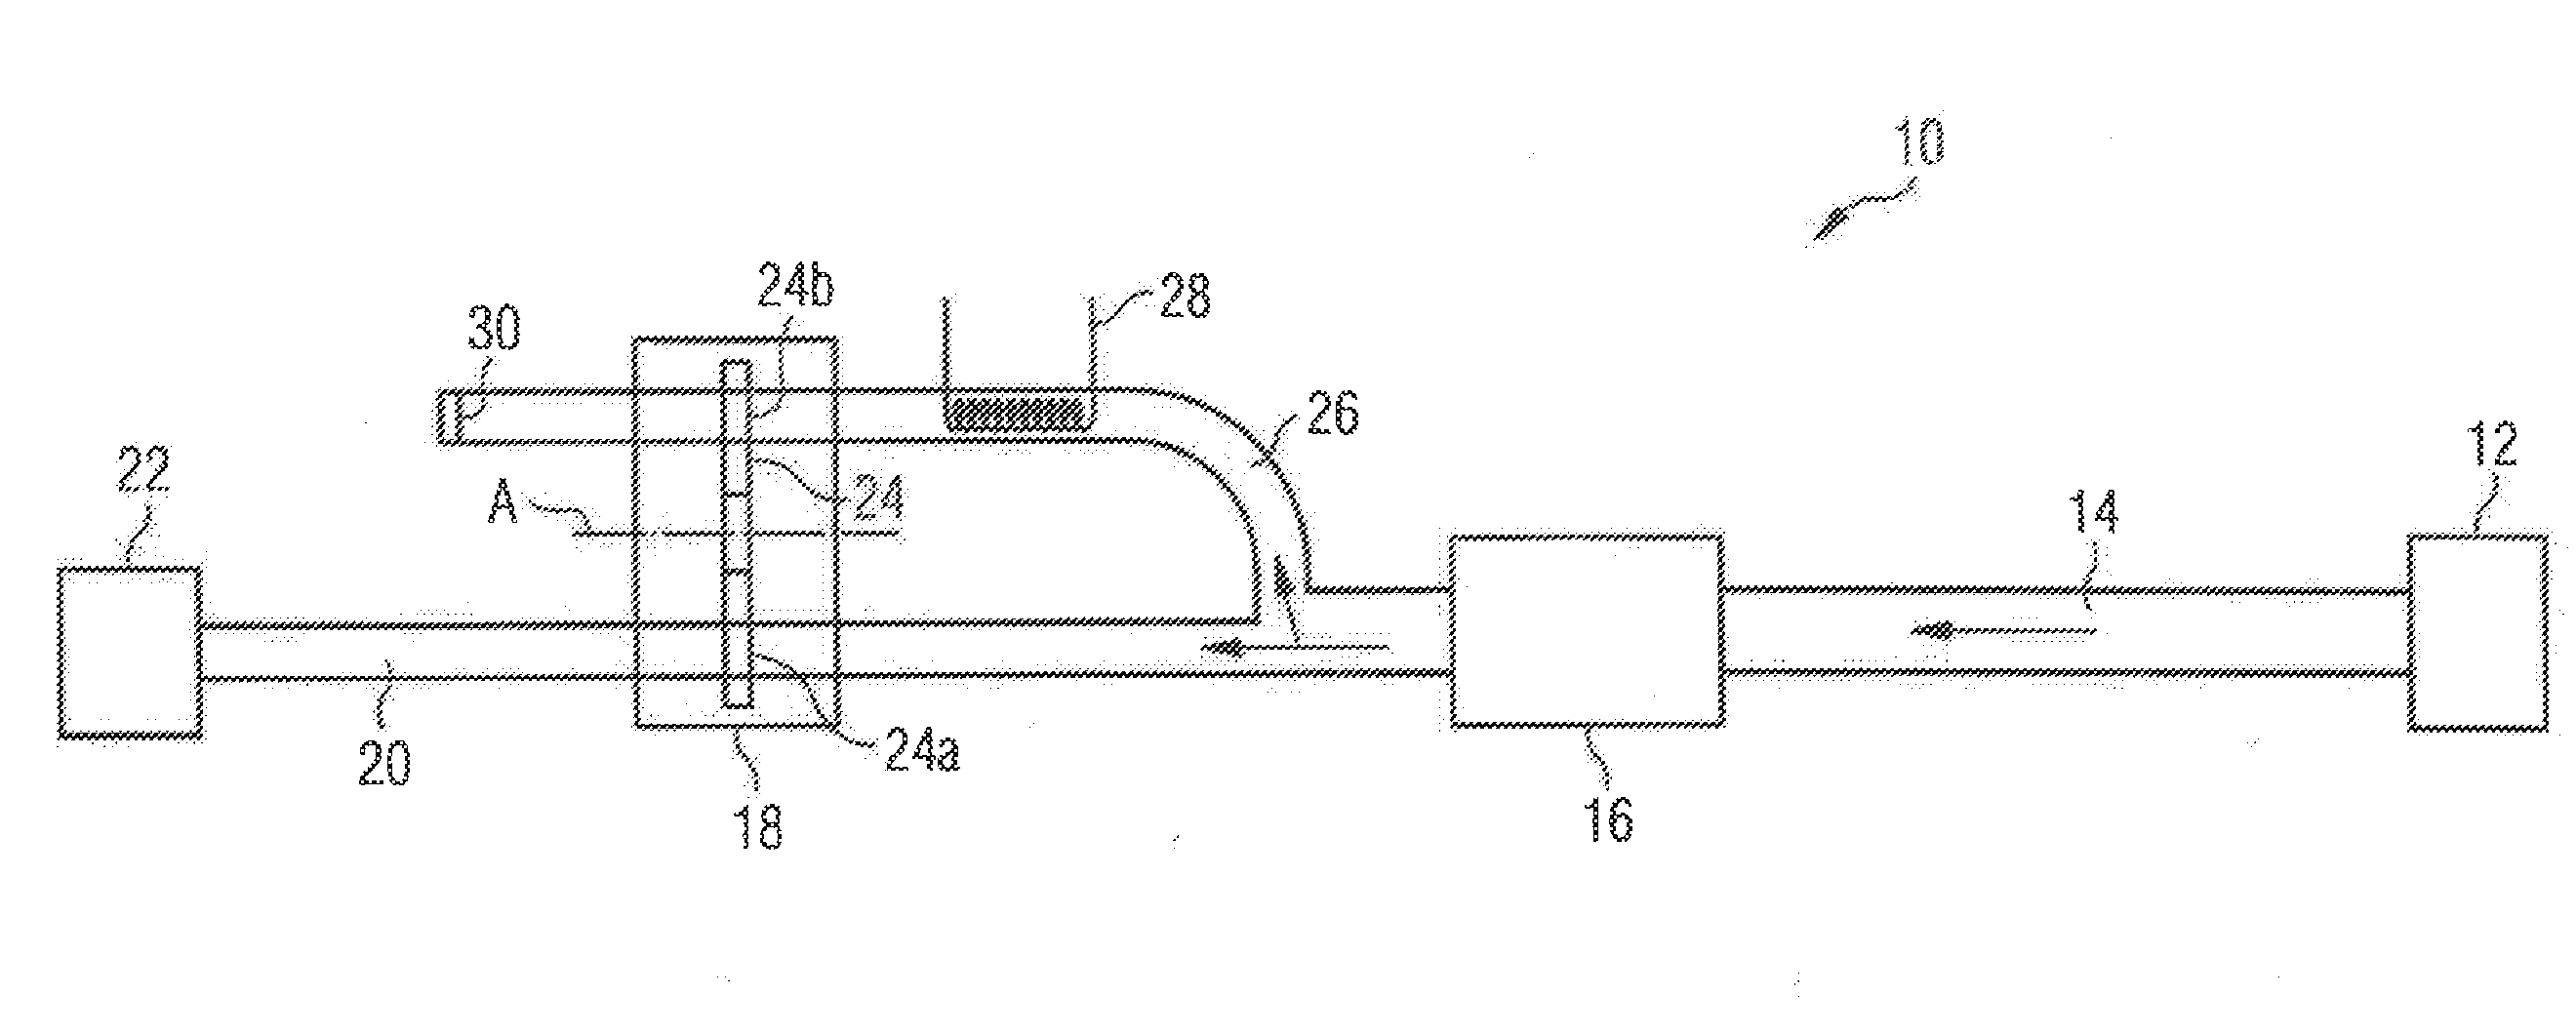 Cabin air extraction system, method for operating a cabin air extraction system and aircraft air-conditioning system